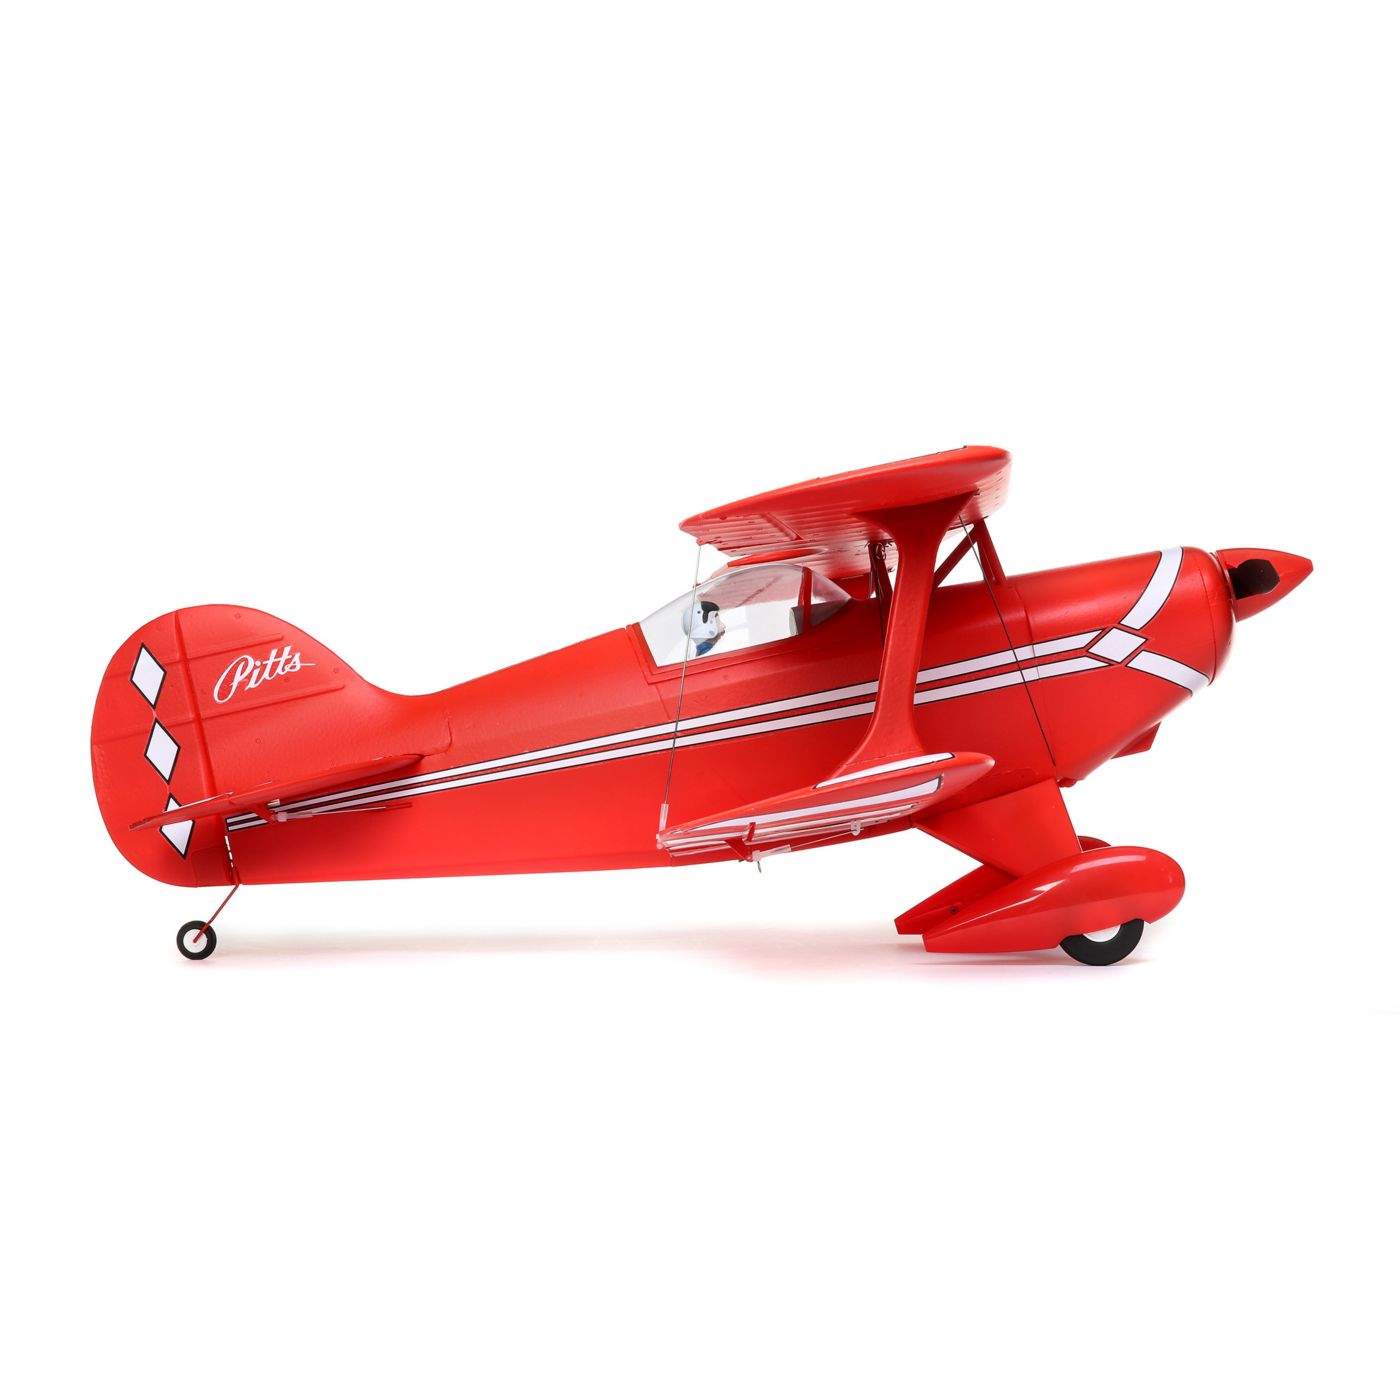 E-Flite Pitts S-1S 850mm BNF Basic with AS3X and SAFE Select